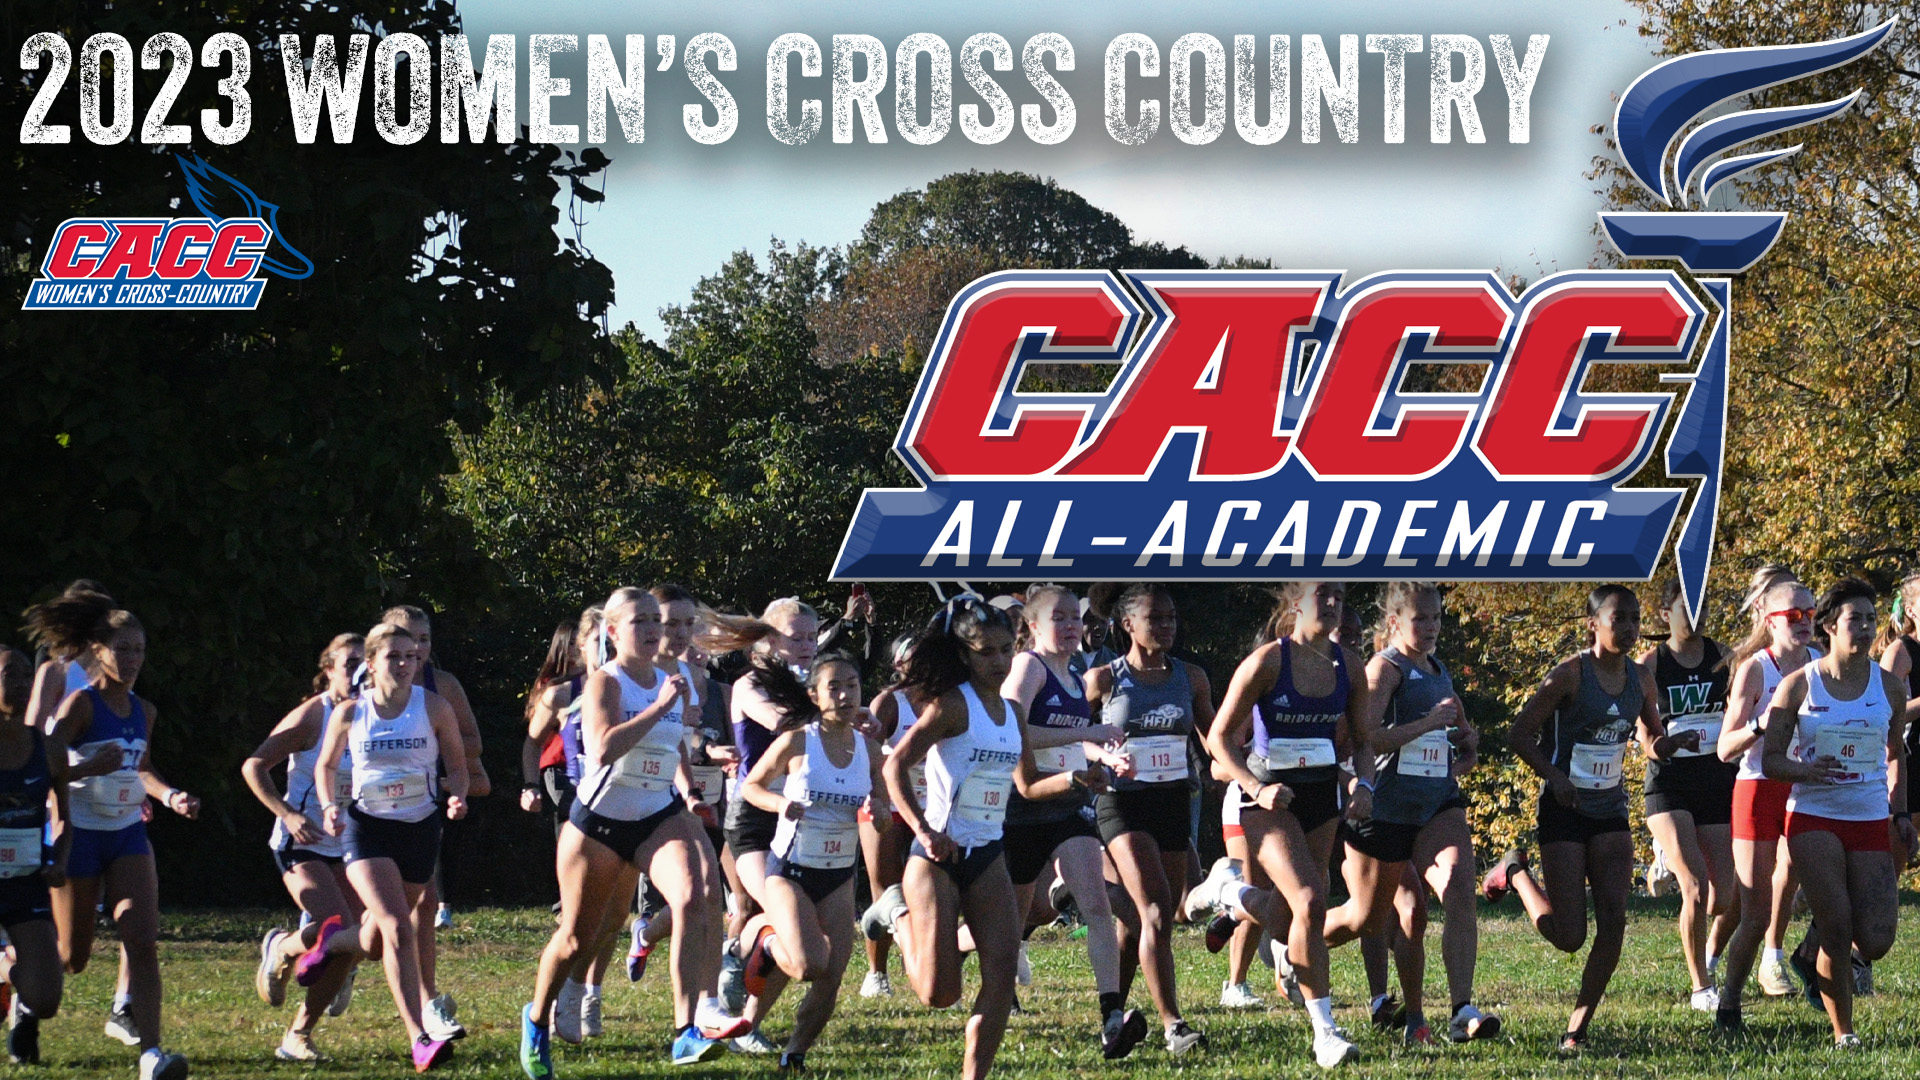 24 S-As Named to the 2023 CACC WXC All-Academic Team